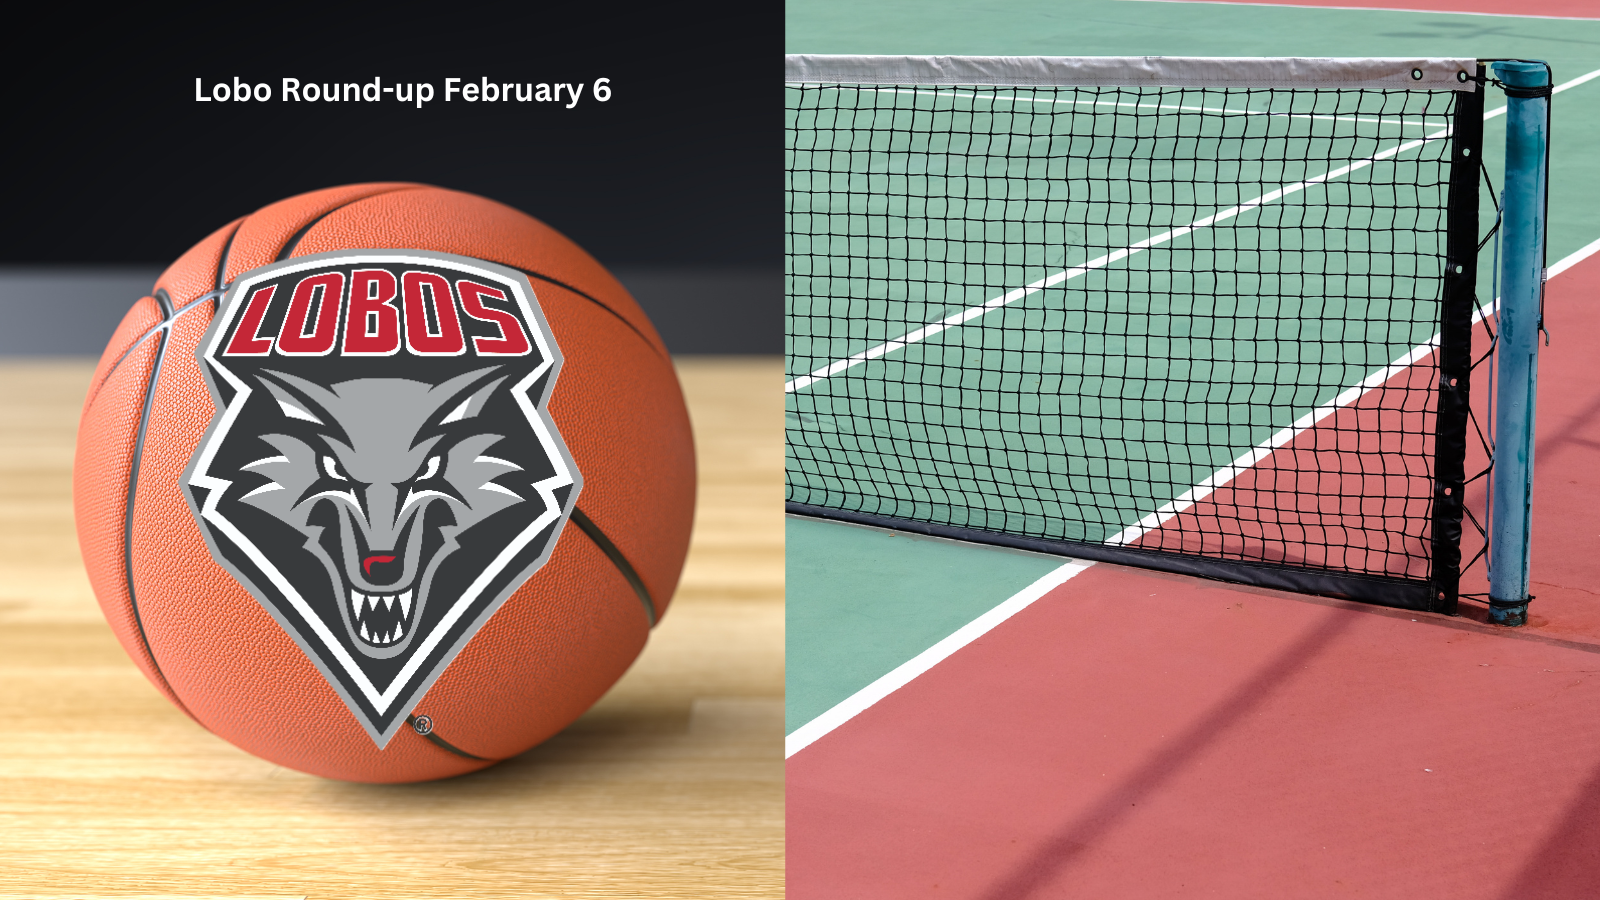 Lobo Round-up: Tennis shines, and a scholarship is awarded